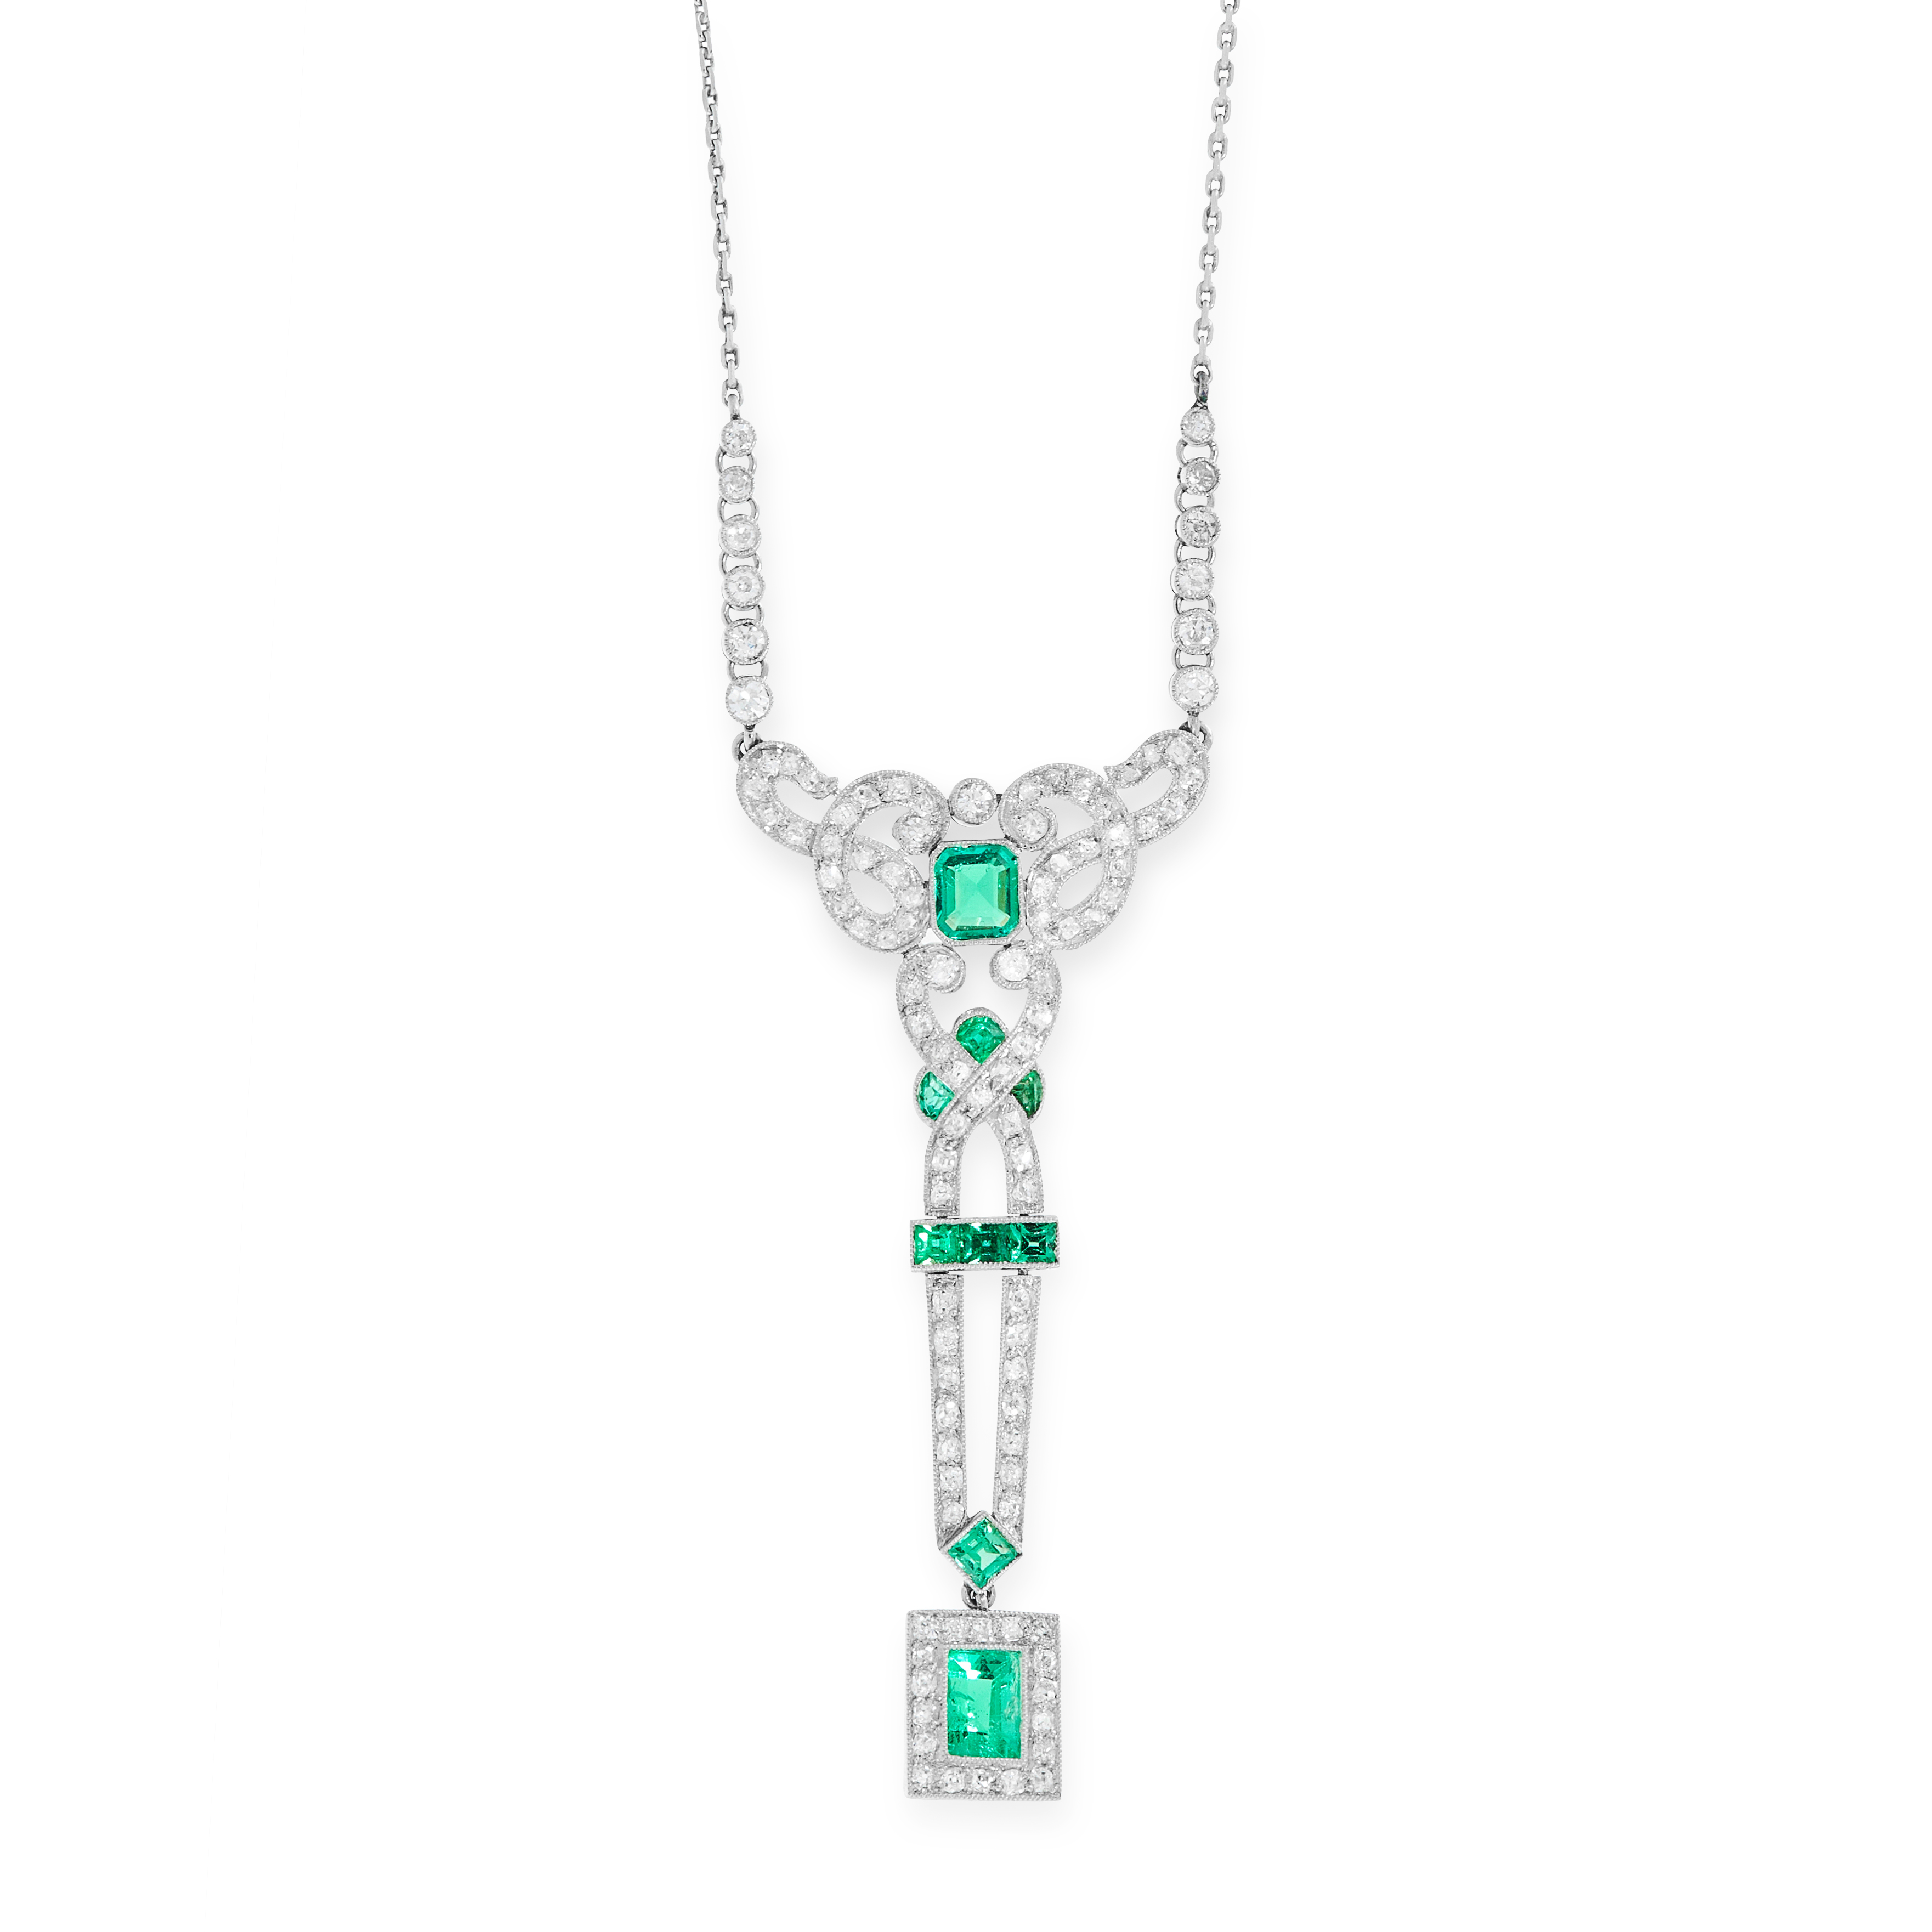 A COLOMBIAN EMERALD AND DIAMOND PENDANT NECKLACE the body formed of a series of scrolling motifs set